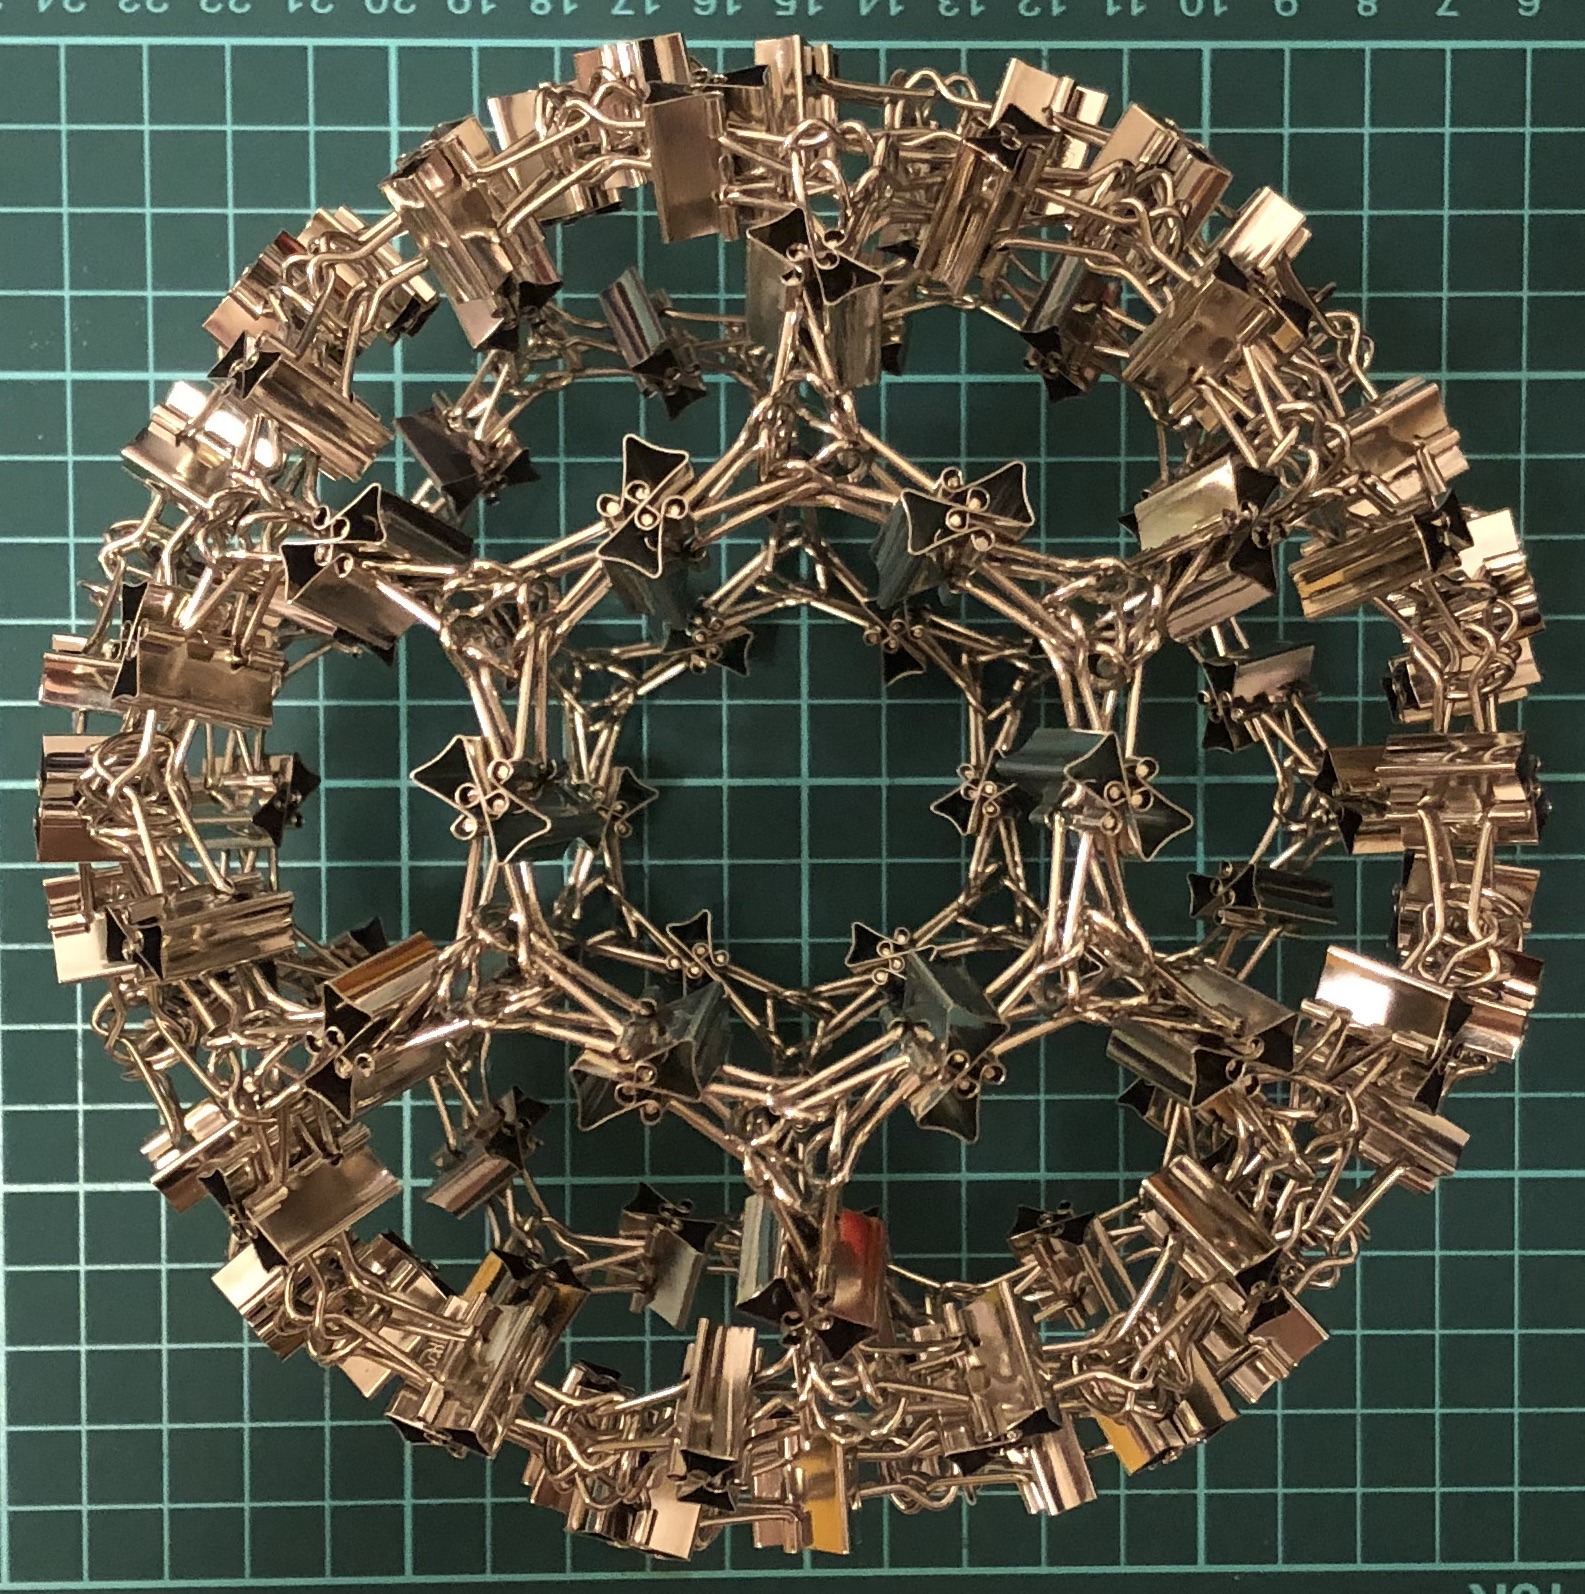 180 clips forming 90 I-edges forming truncated icosahedron